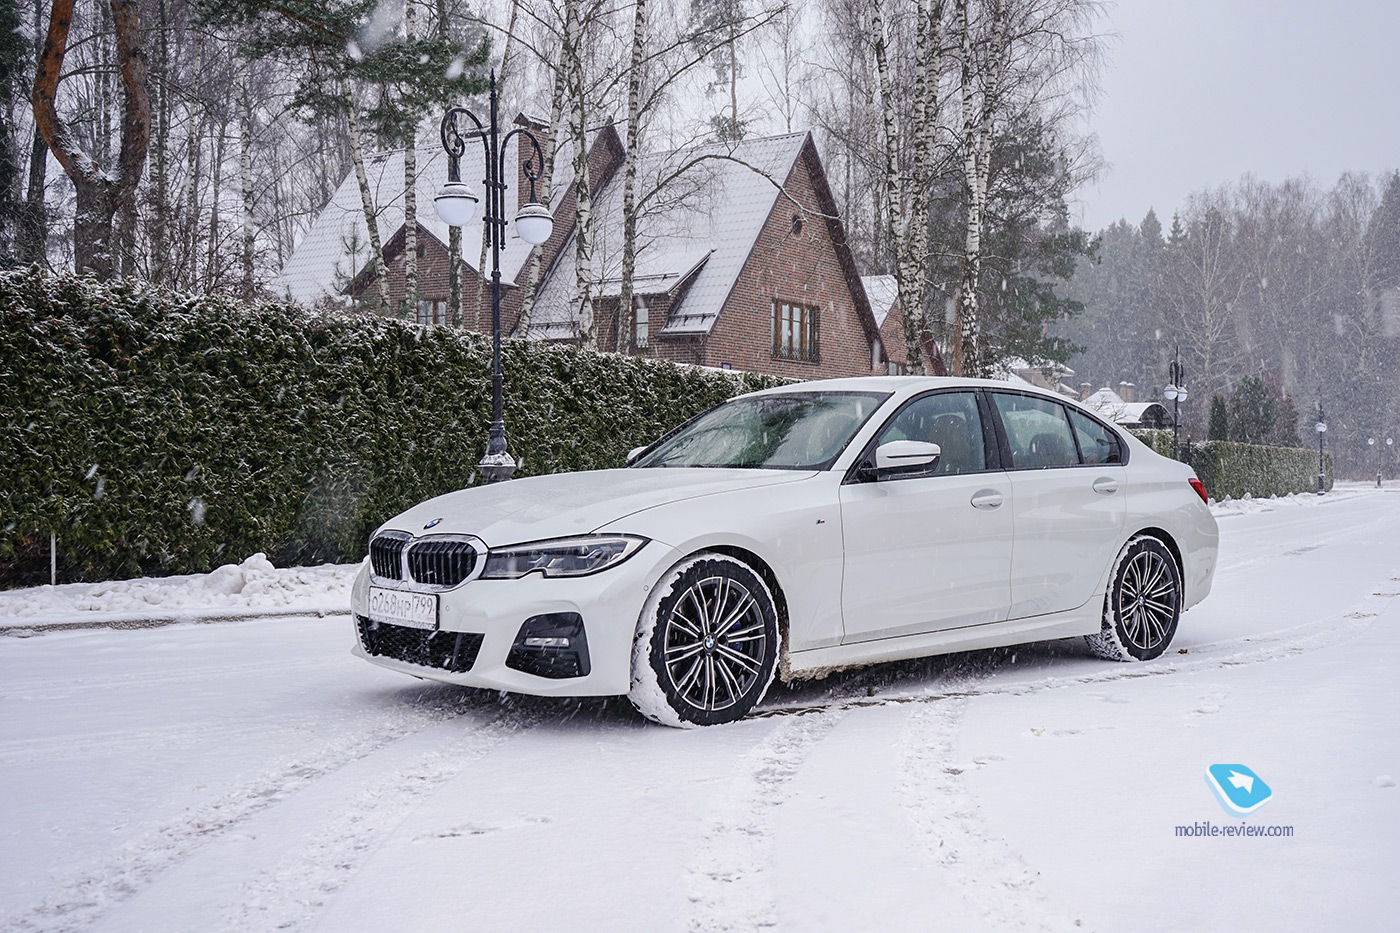 BMW 320d test. How much better is the G20 than the F30